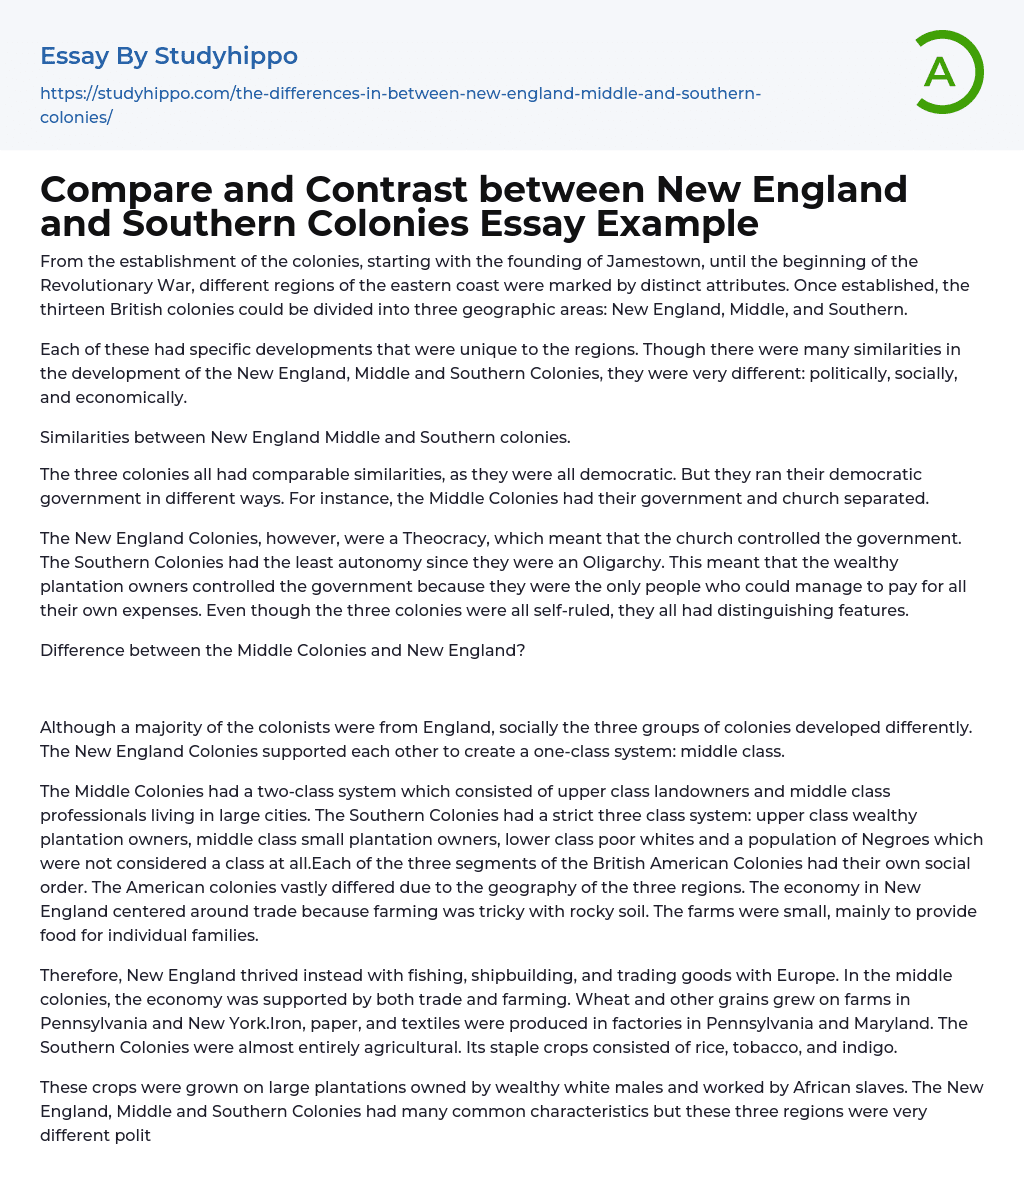 Compare and Contrast between New England and Southern Colonies Essay Example